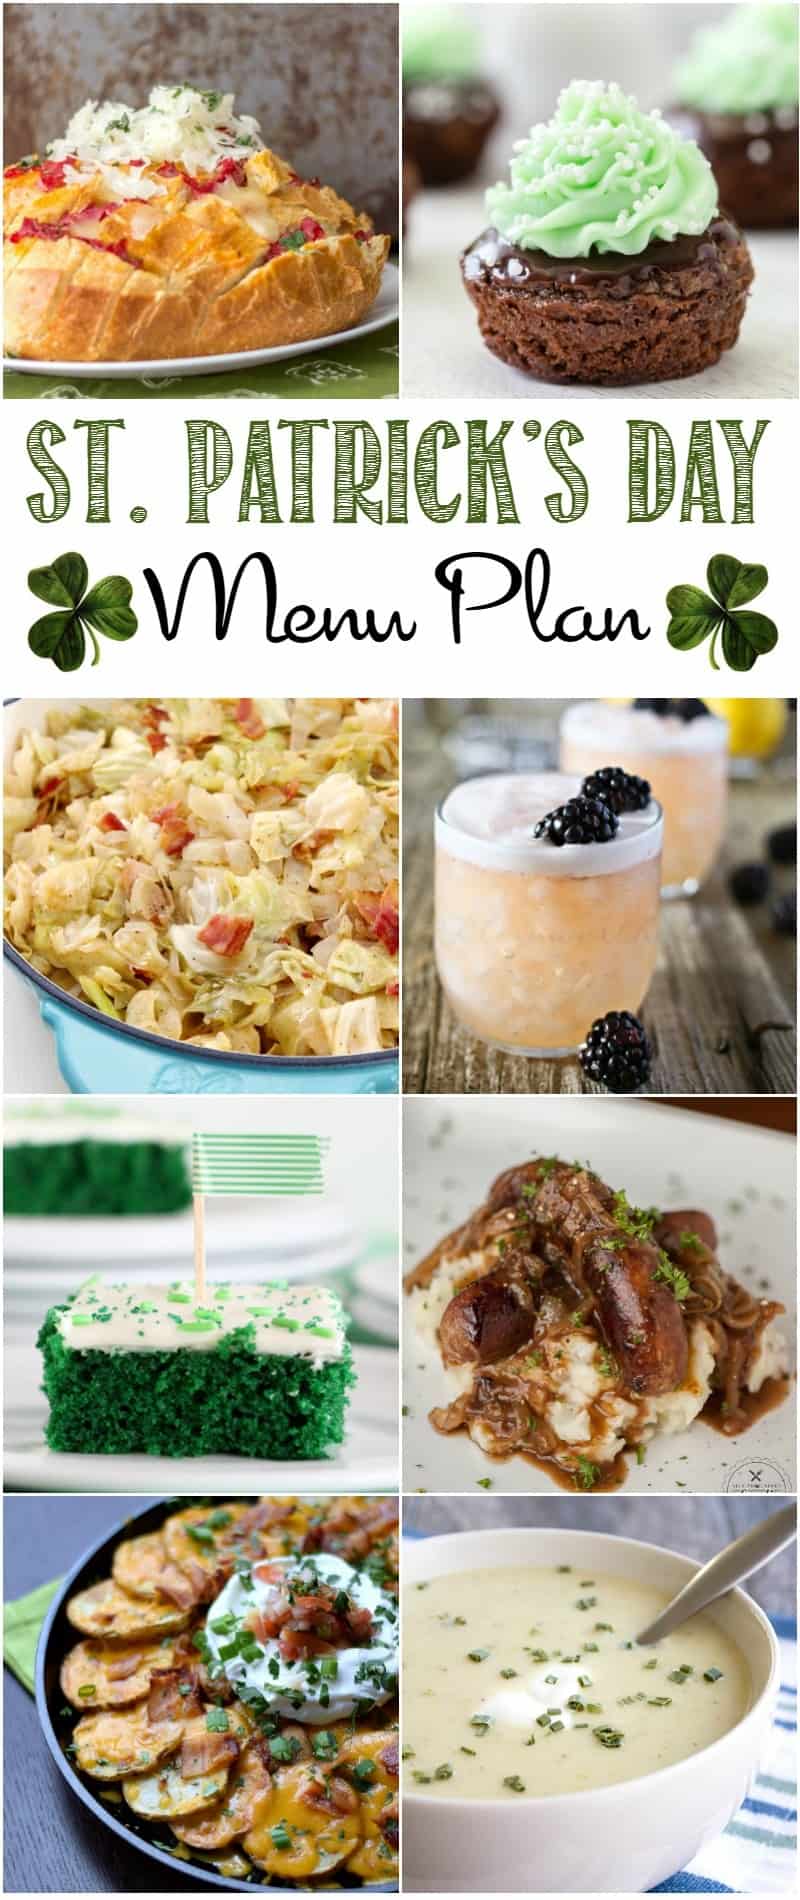 From appetizers to desserts, this St. Patrick's Day Menu Plan will help you plan an amazing party to celebrate with your favorite Leprechauns! | cookingwithcurls.com